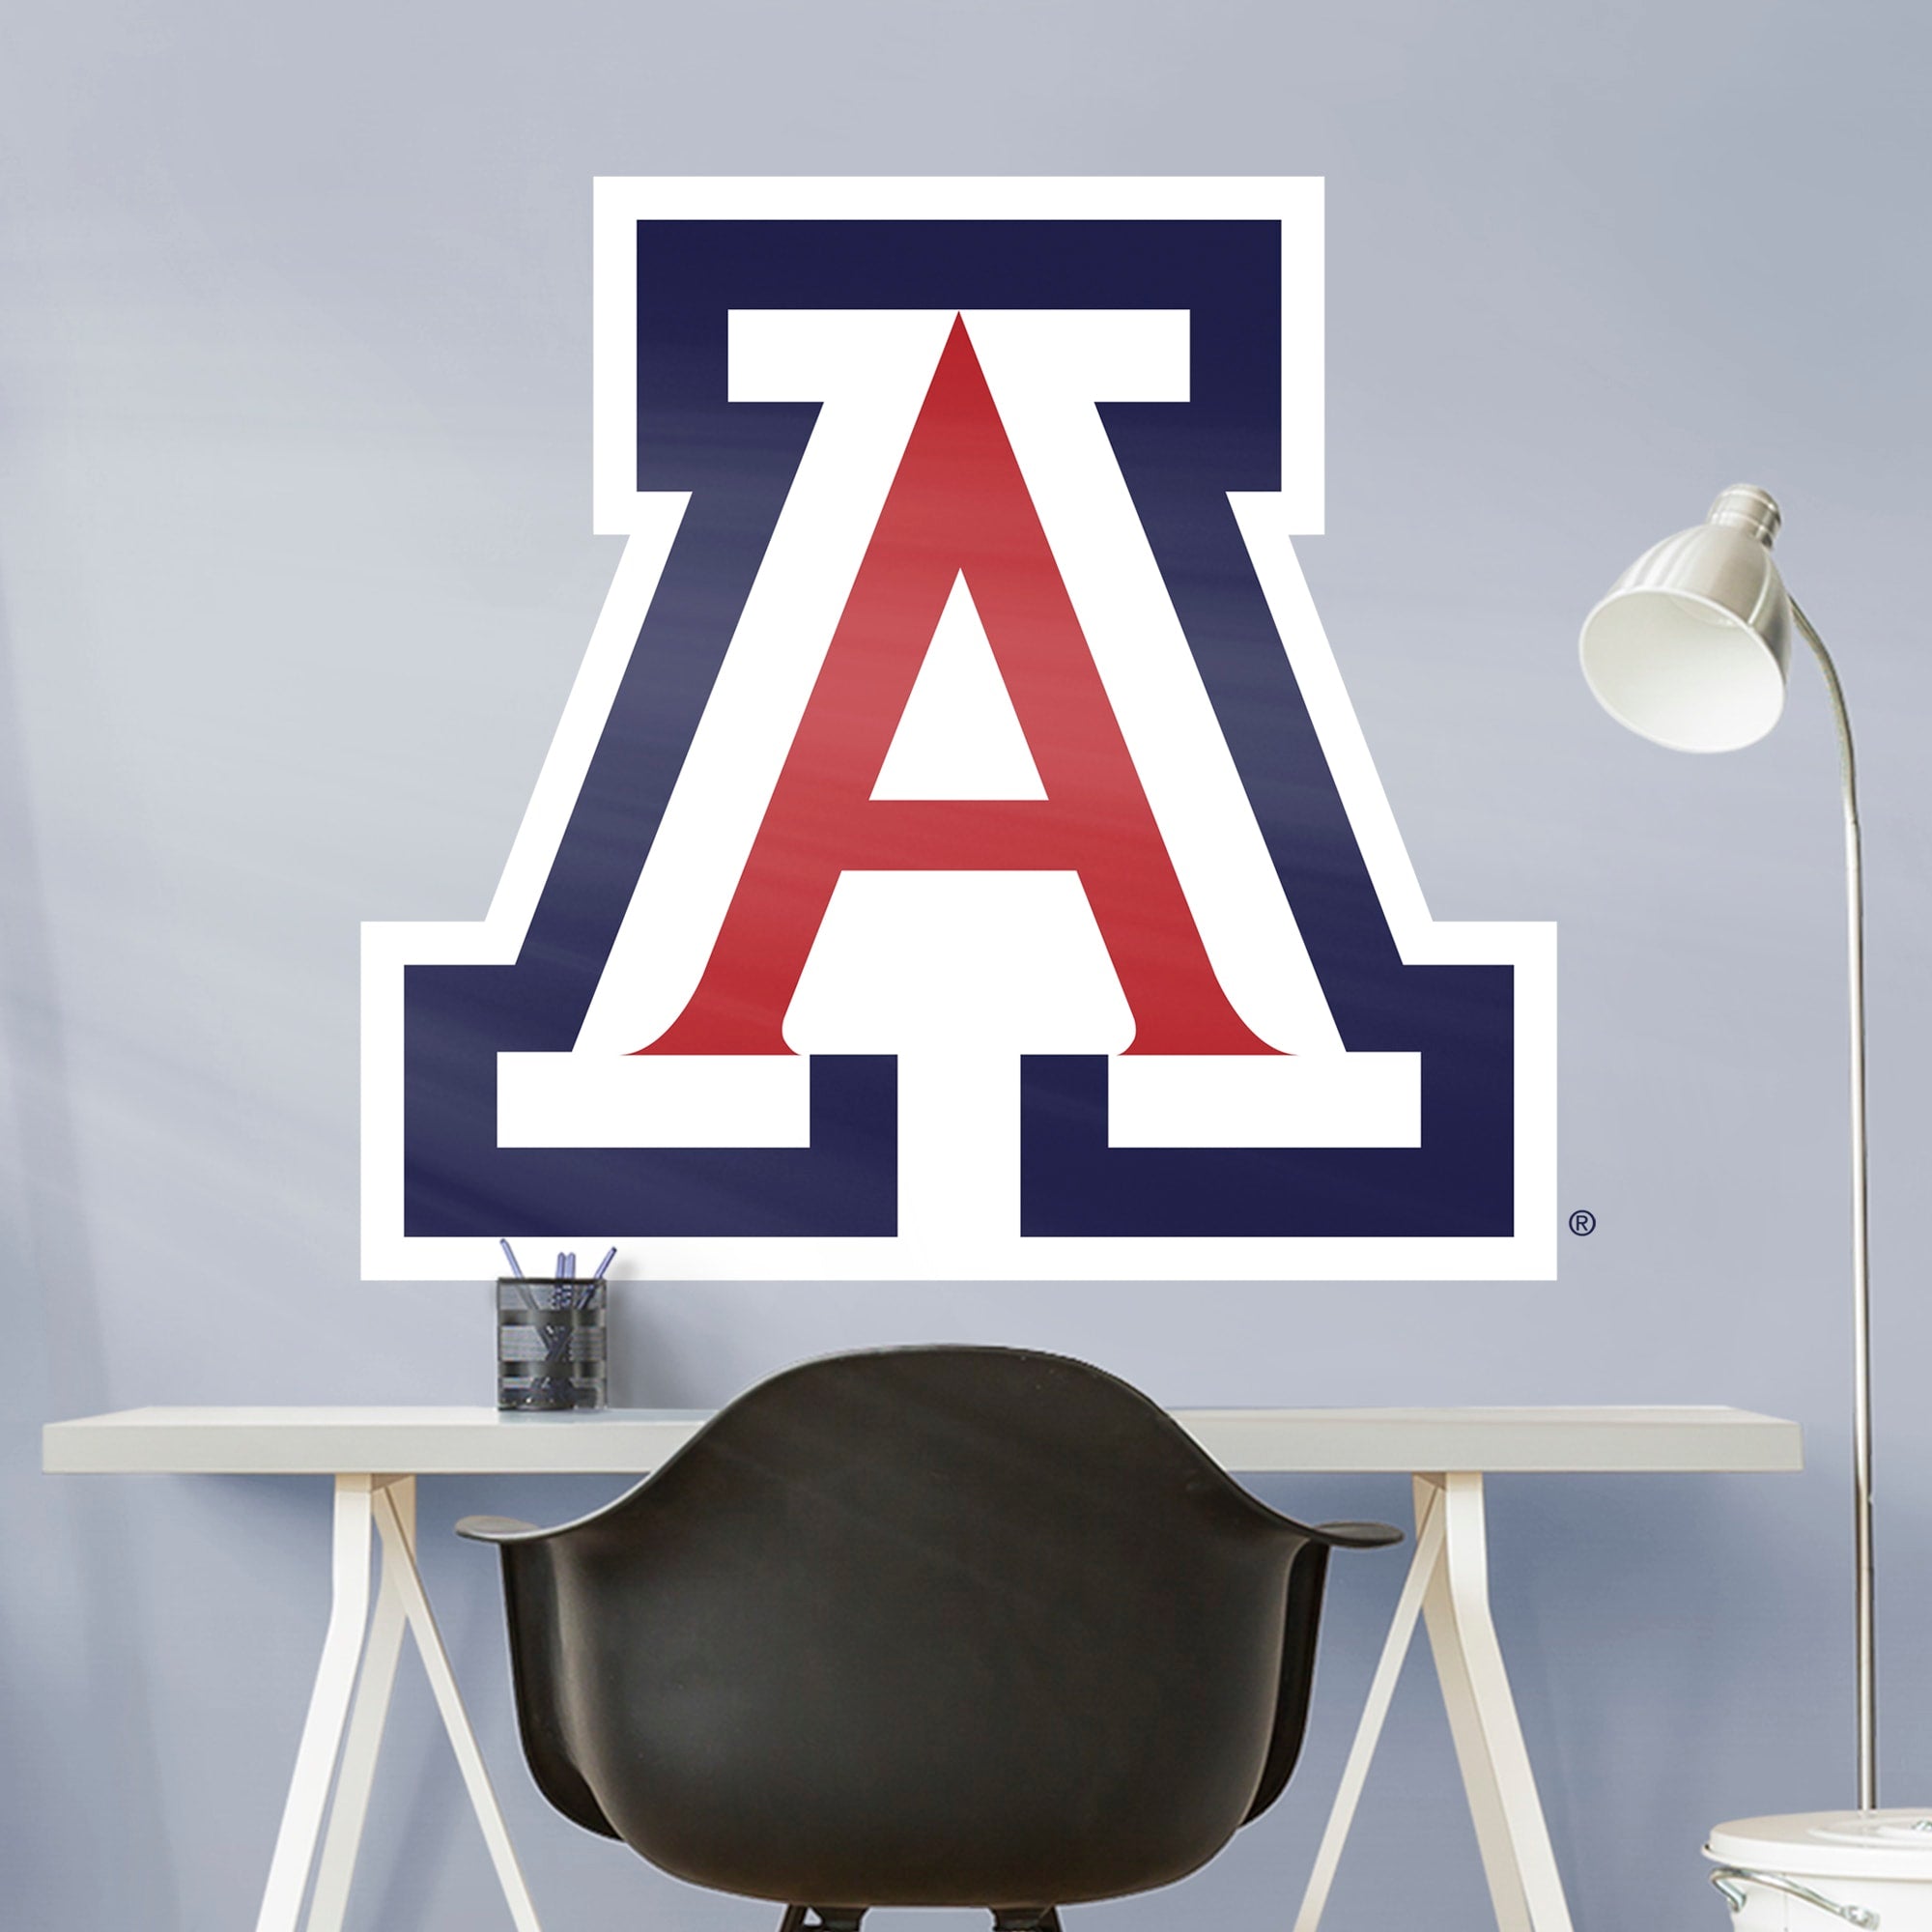 Arizona Wildcats: Logo - Officially Licensed Removable Wall Decal Giant Logo (39"W x 38"H) by Fathead | Vinyl